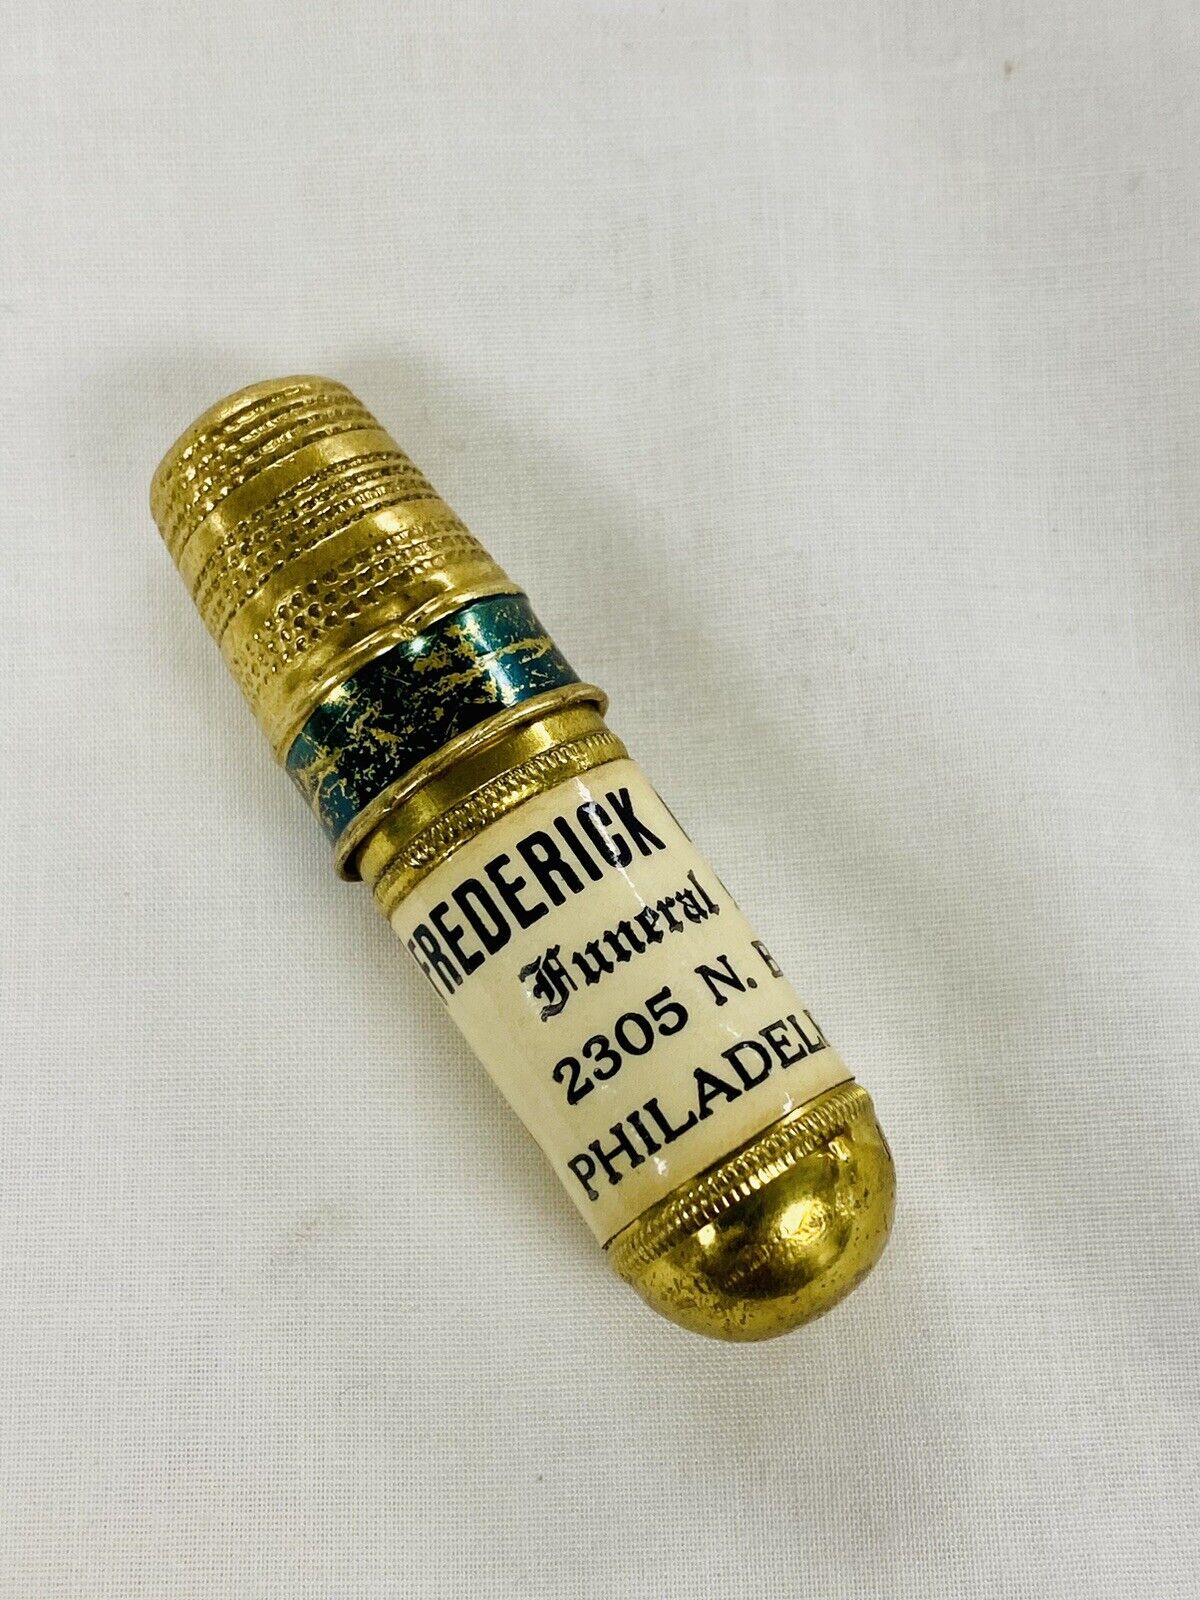 Vintage Thimble Sewing Kit For “Fredrick Mann,Jr Funeral Service” Broad St, Phil